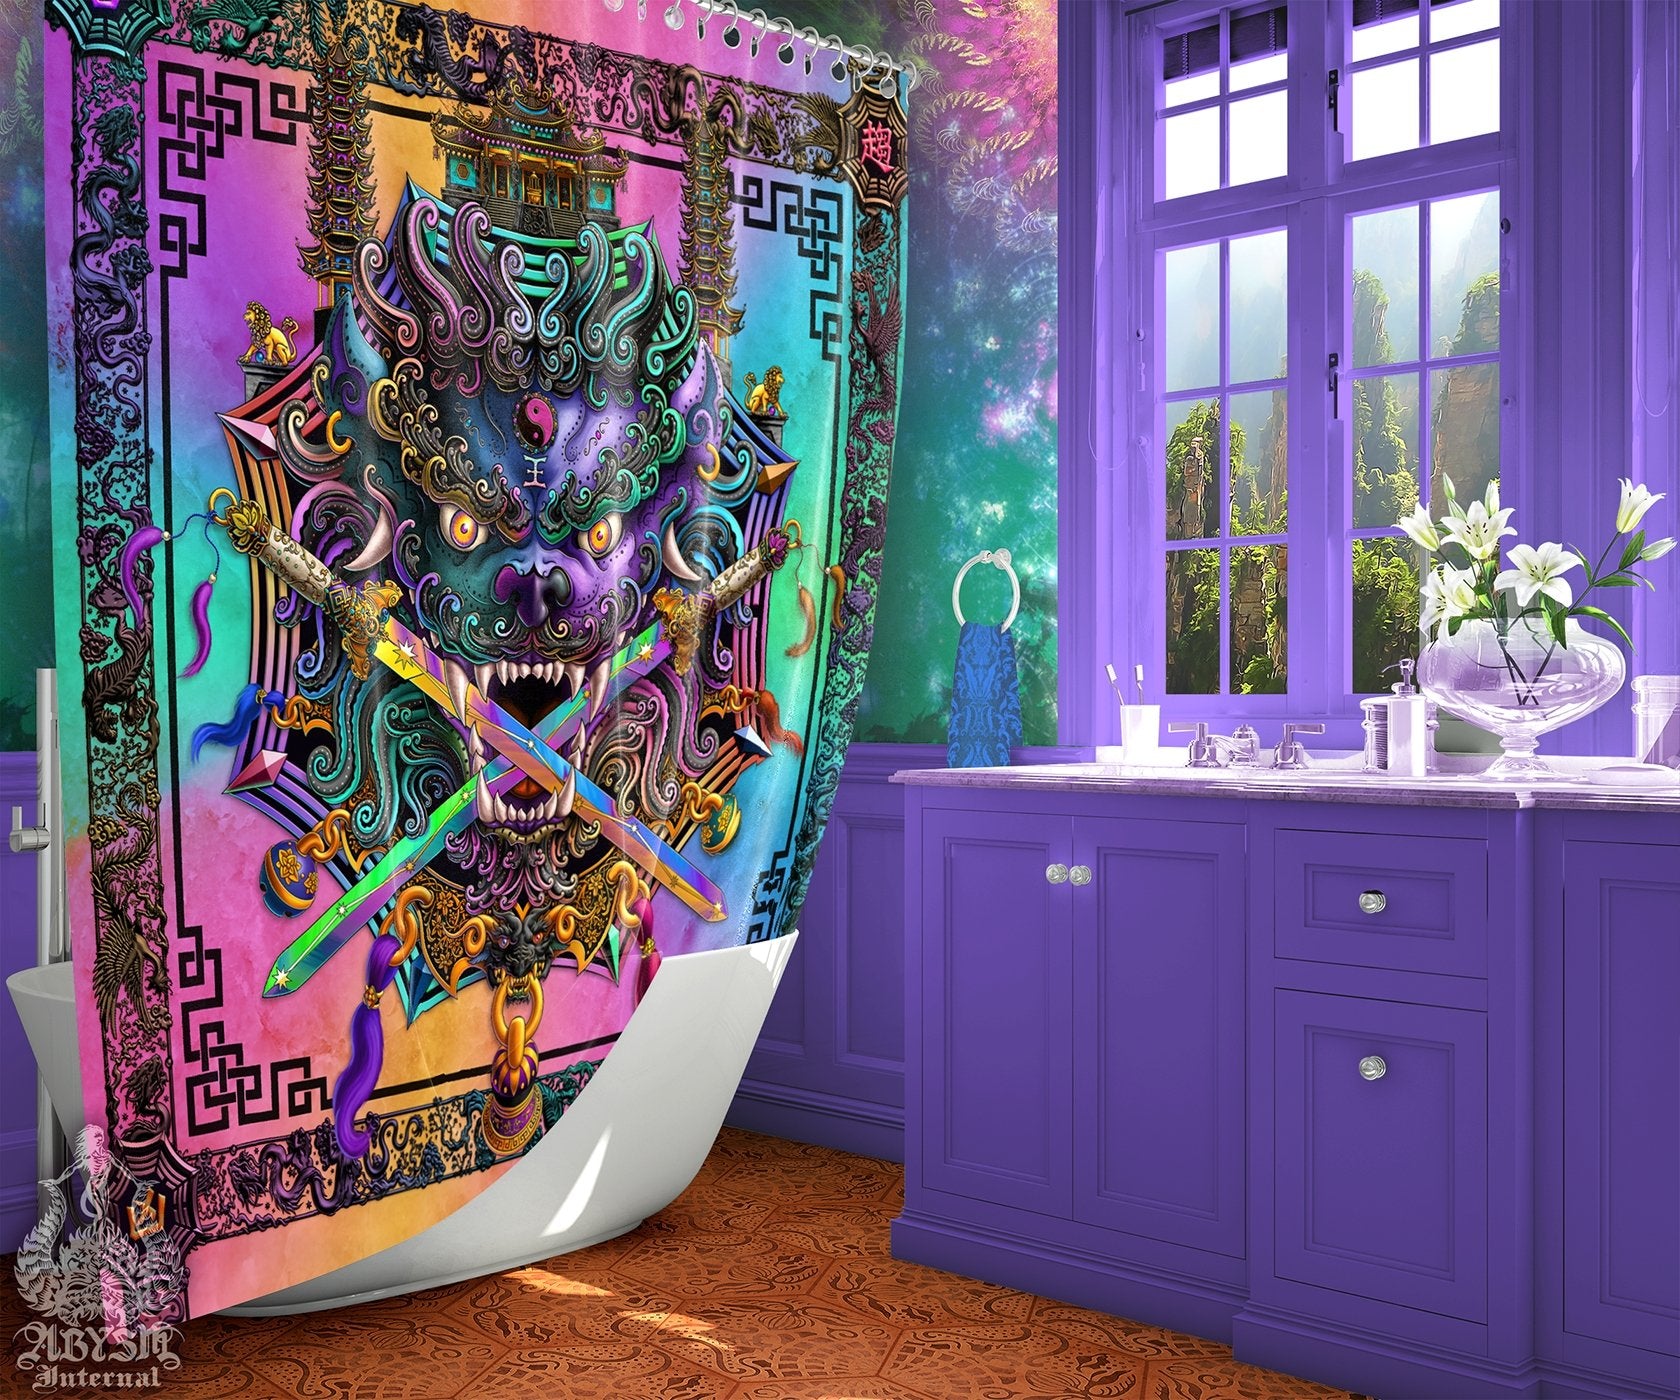 Lion Shower Curtain, Taiwan Sword Lion, Chinese Bathroom, Alternative Fantasy Decor, Asian Mythology, Eclectic and Funky Home - Holographic Pastel Punk and Black - Abysm Internal